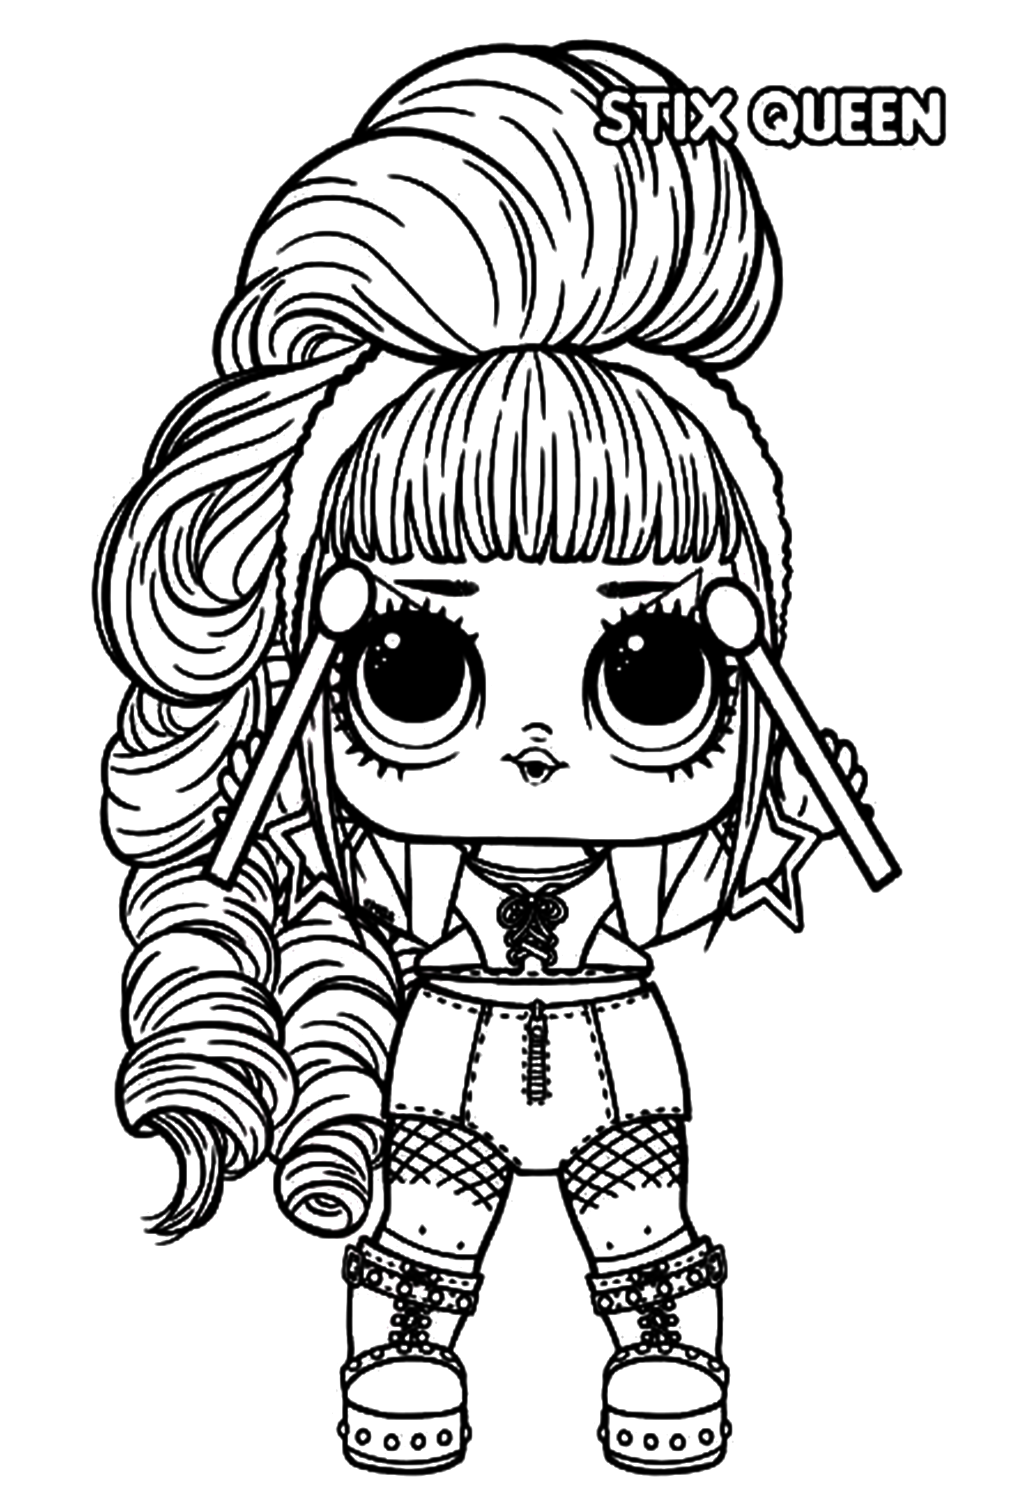 Queen Lol Surprise Doll Coloring Pages